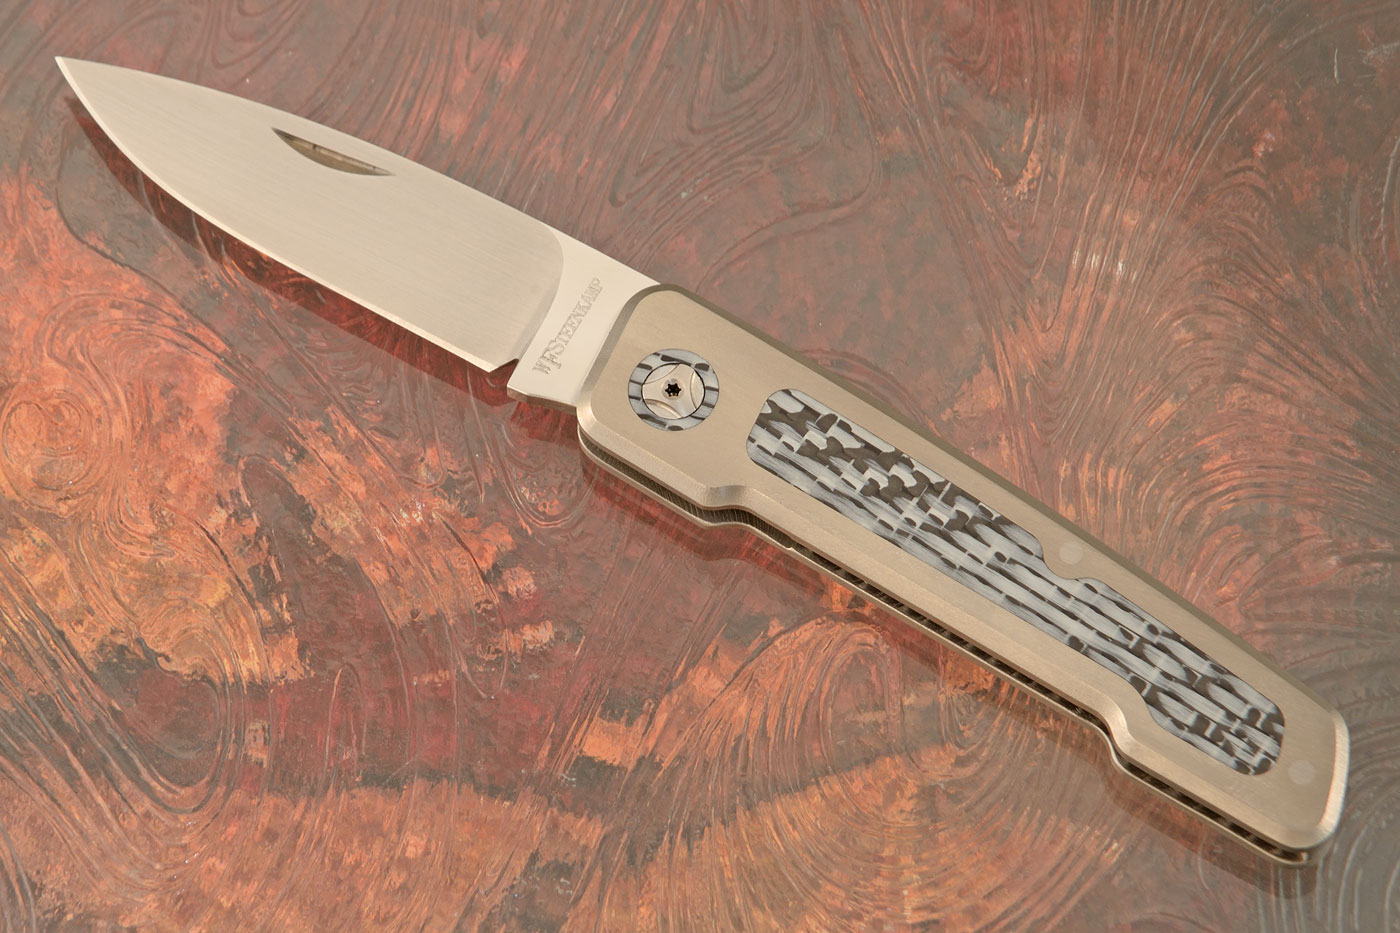 Pointer Slipjoint with Titanium and Black & White Carbon Fiber Inlays - M390